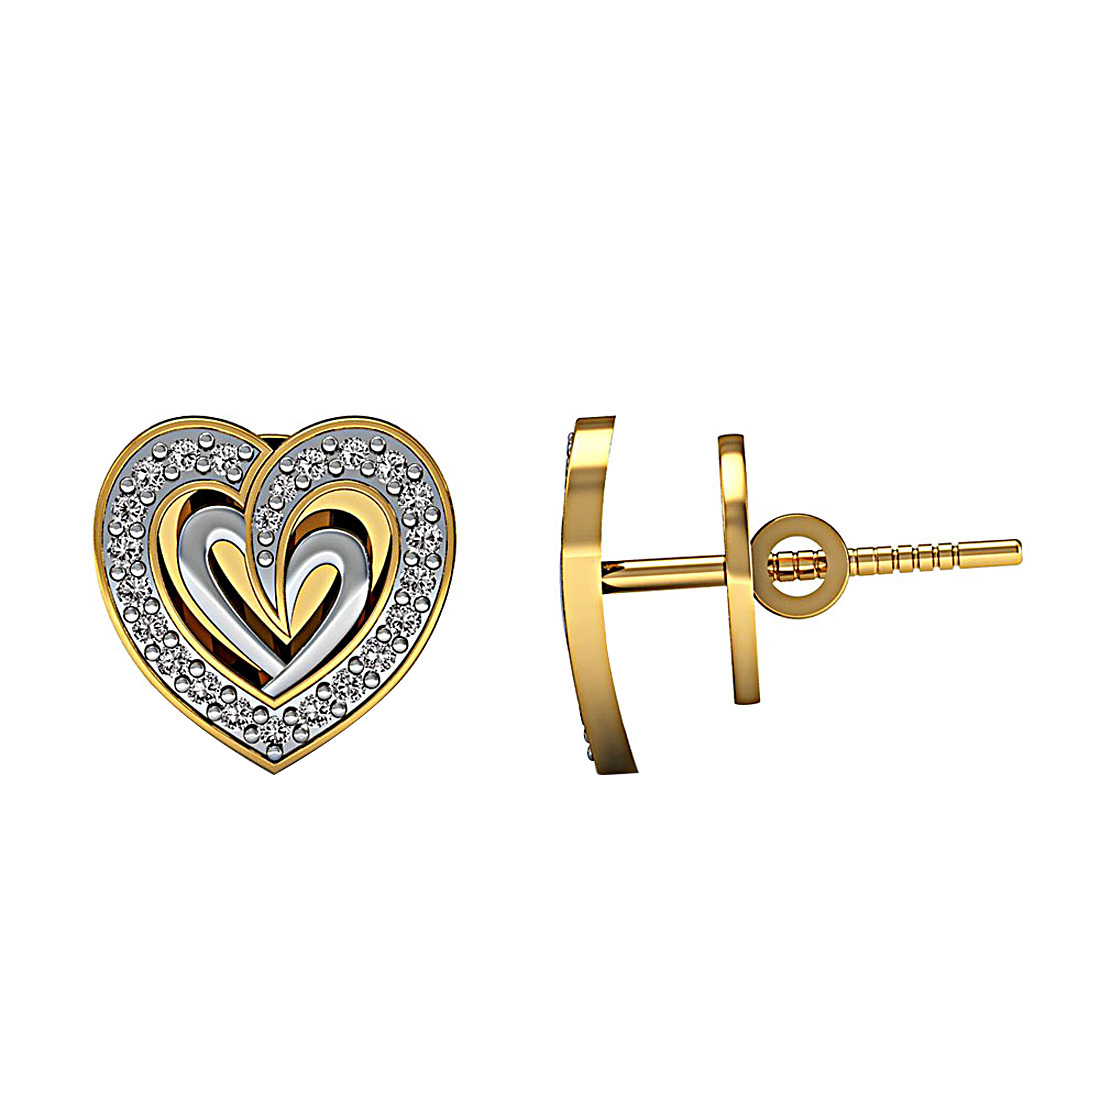 18k solid gold heart stud earrings with real diamond